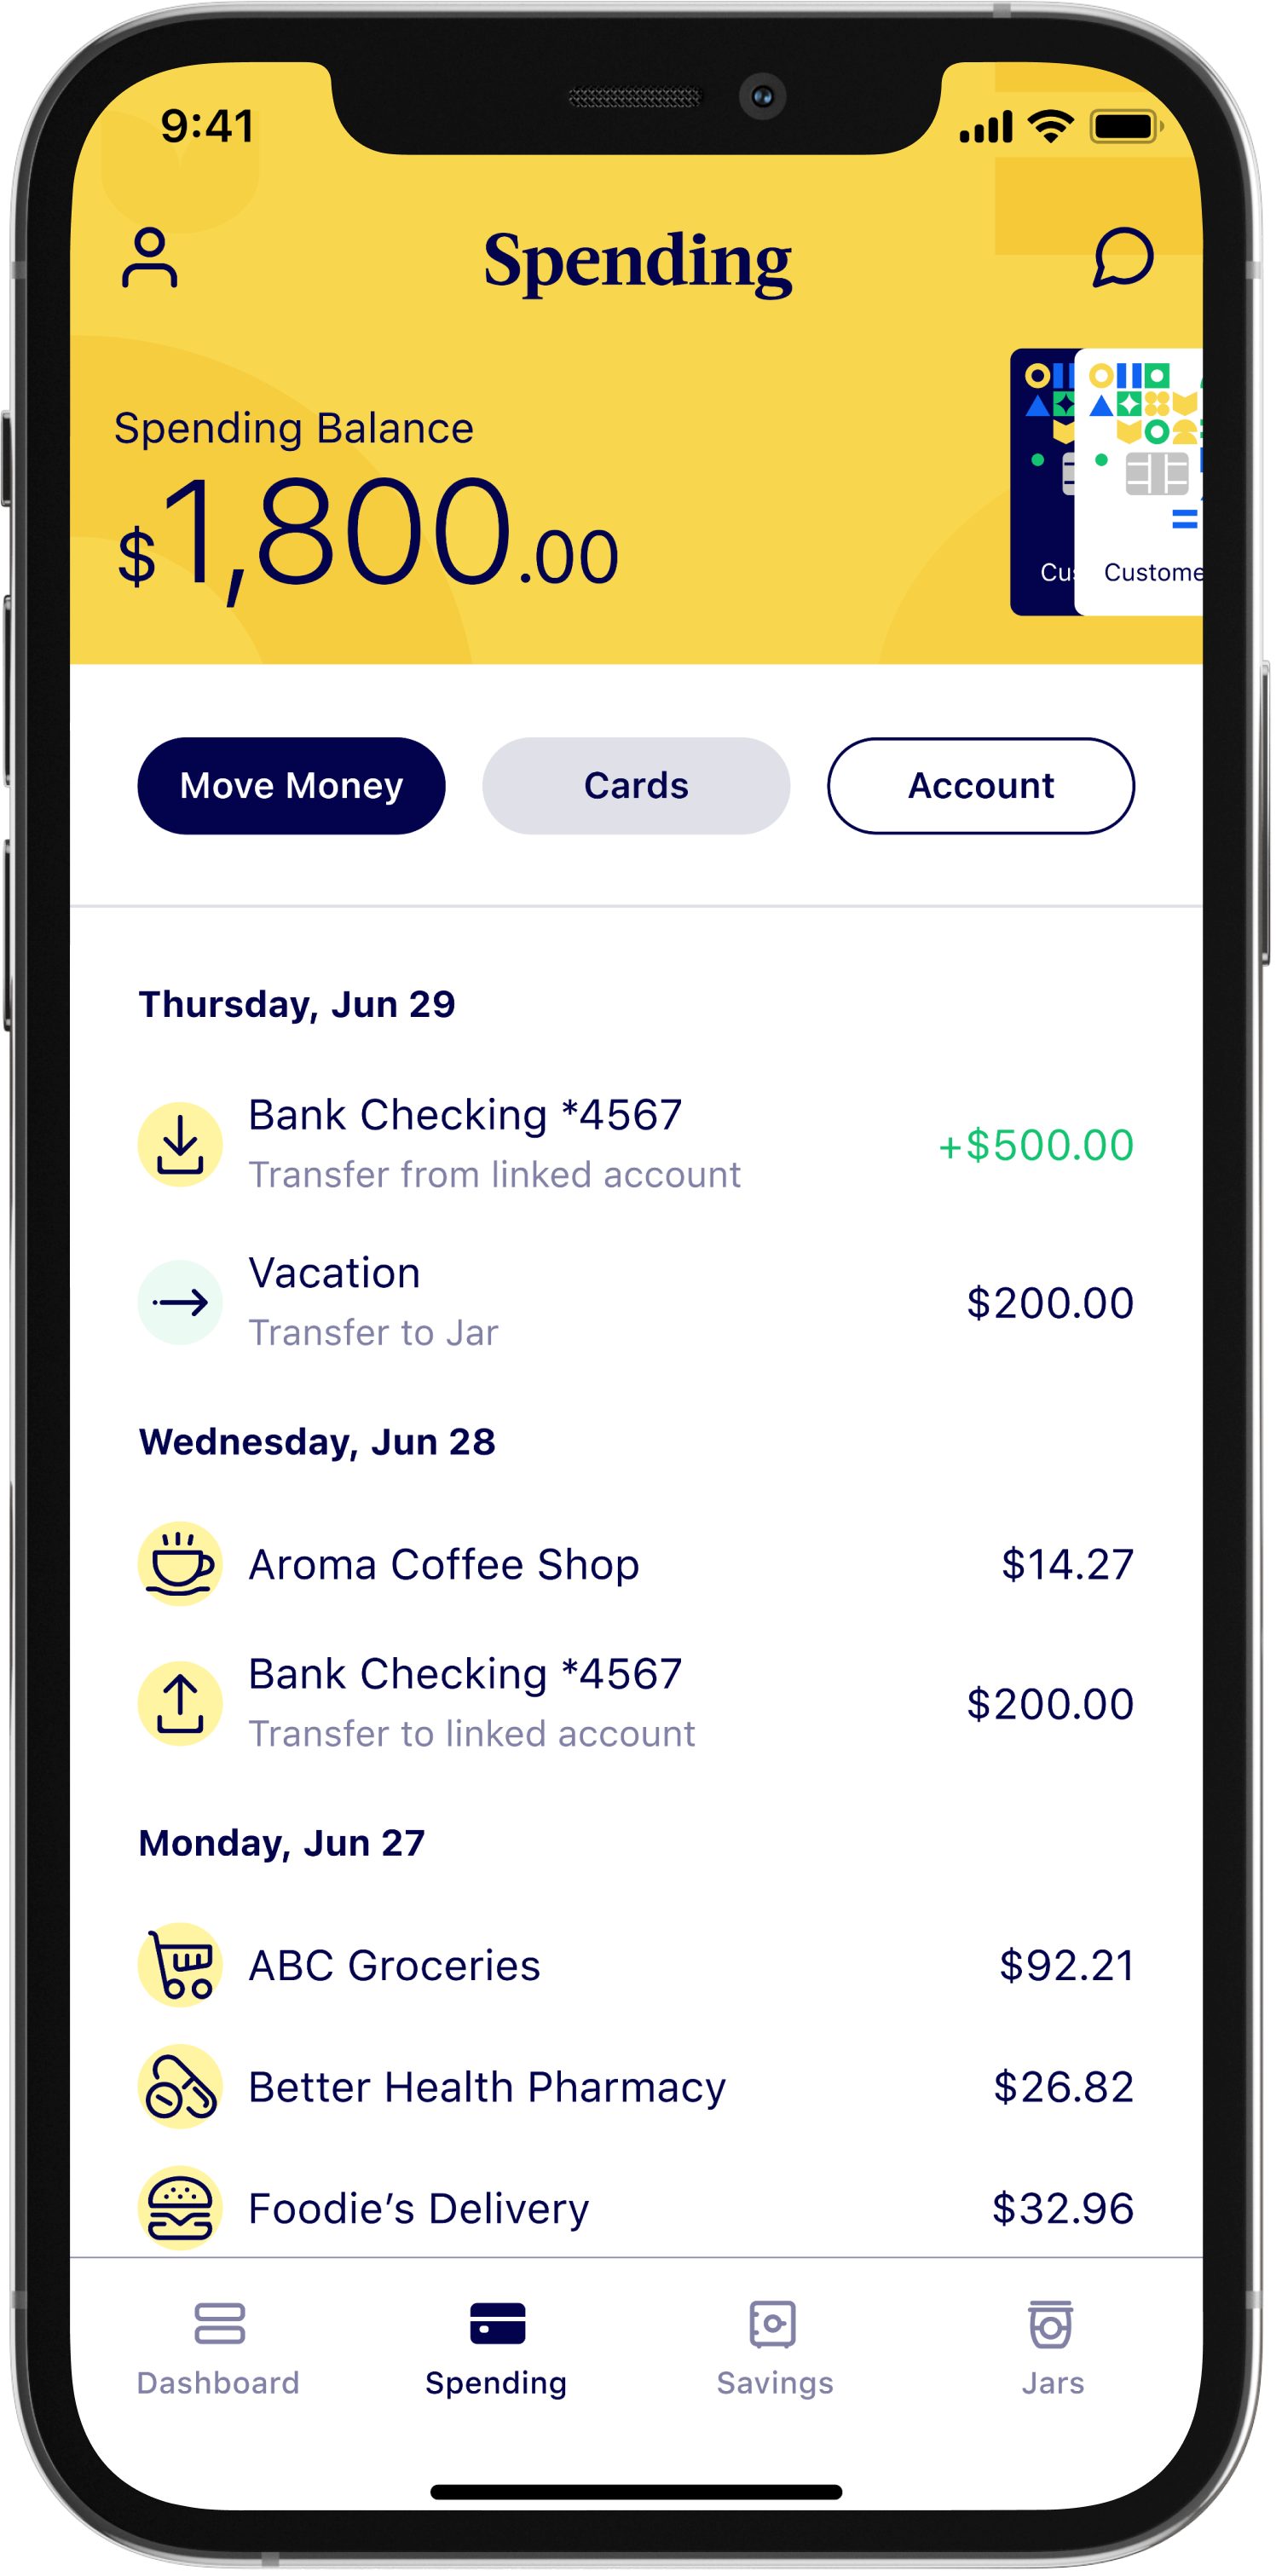 This is an image of the Spending Screen inside the Milli App.